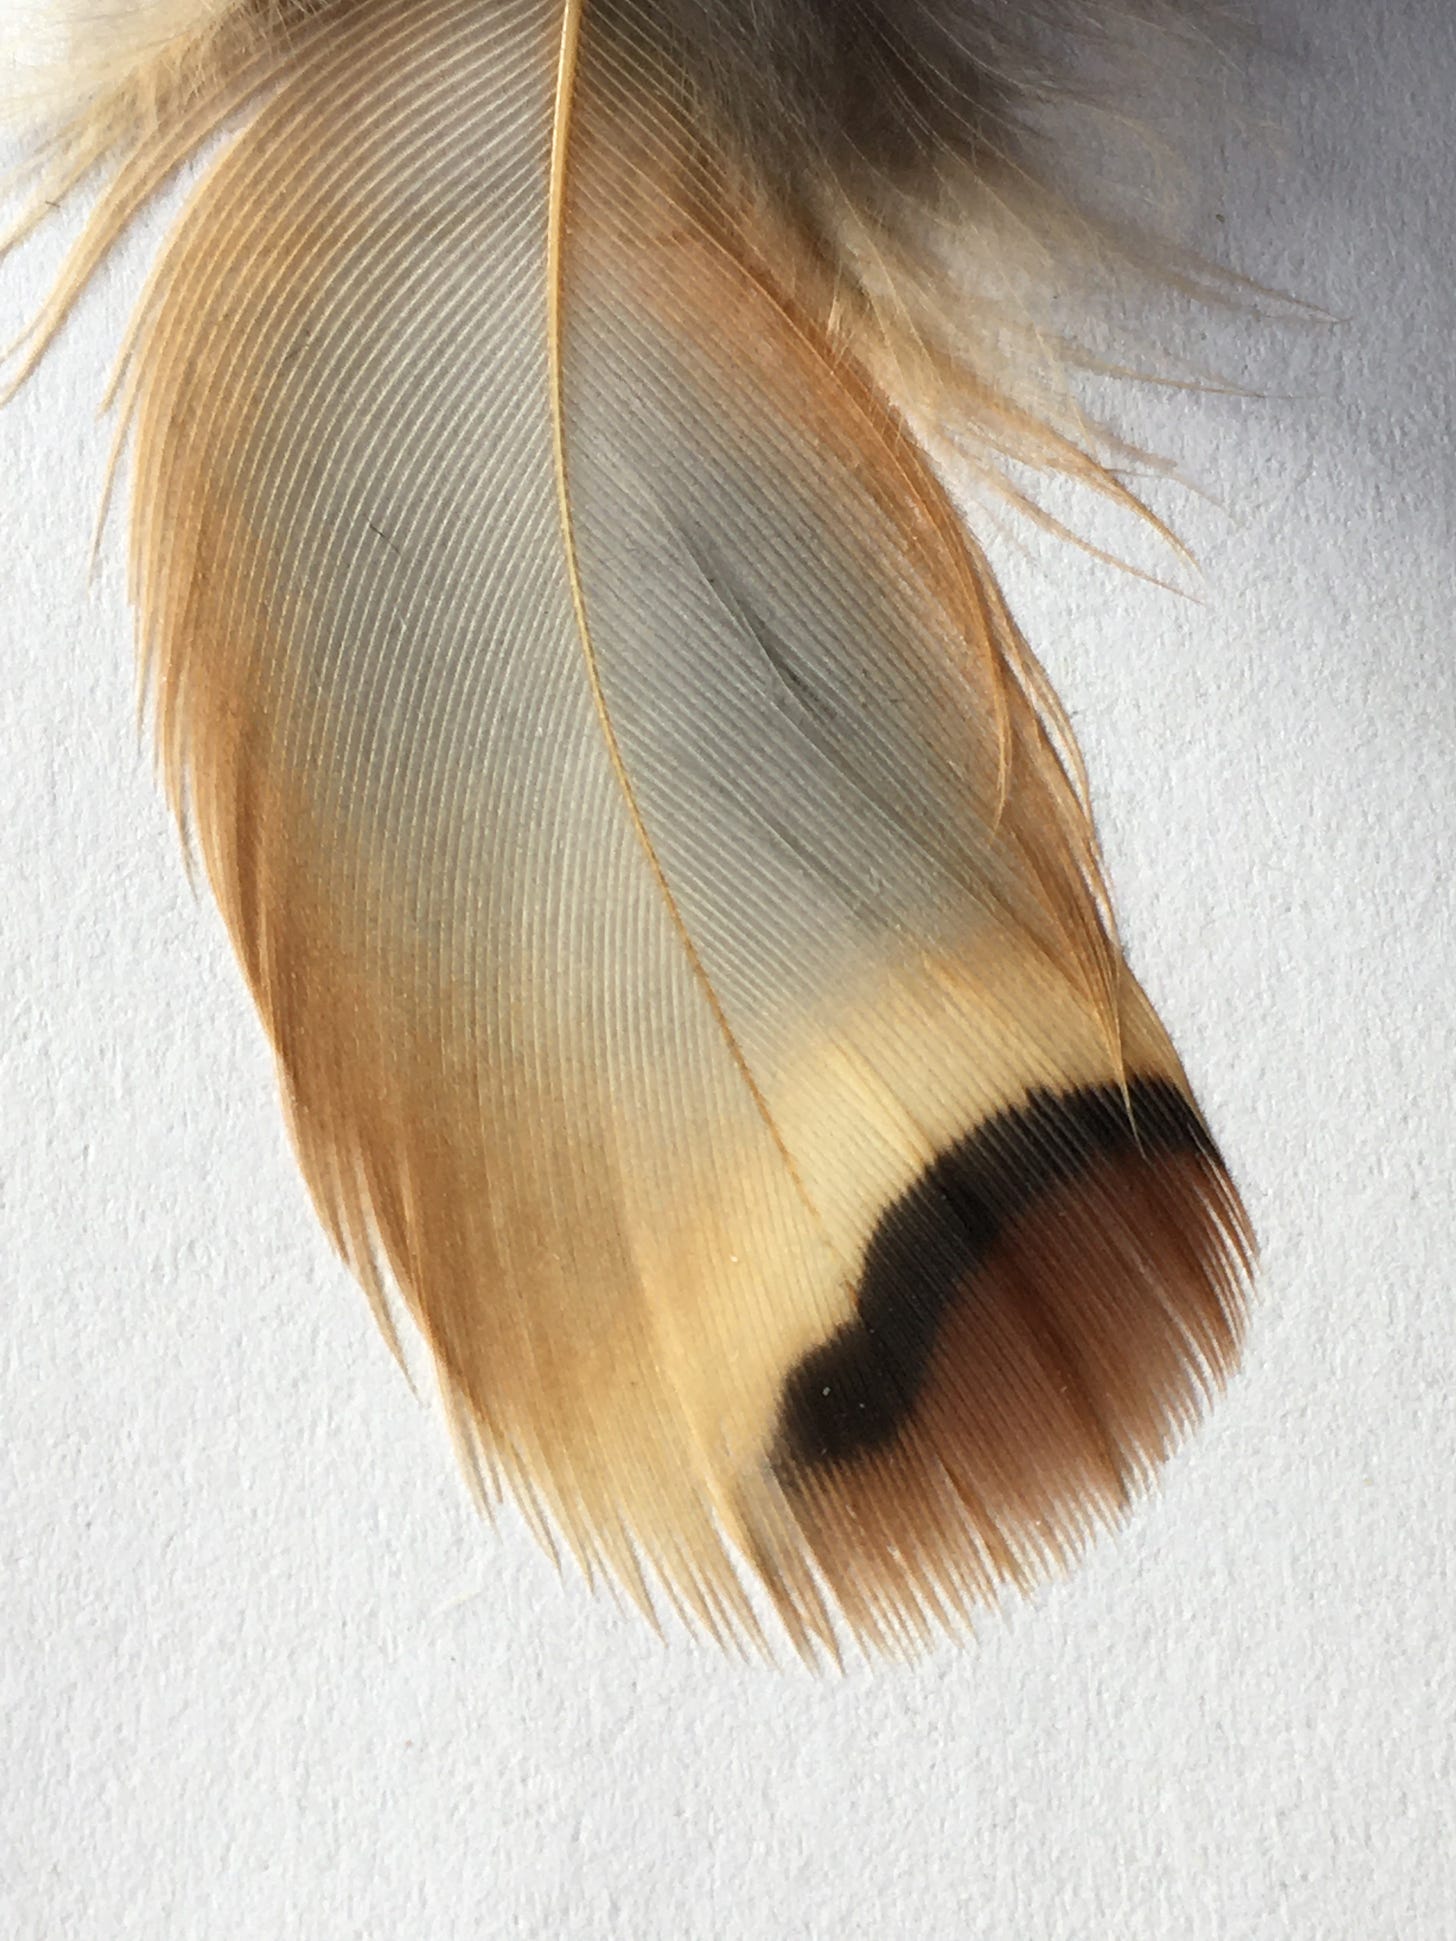 Tan feather with grey middle, and buff, black and brown areas near the tip